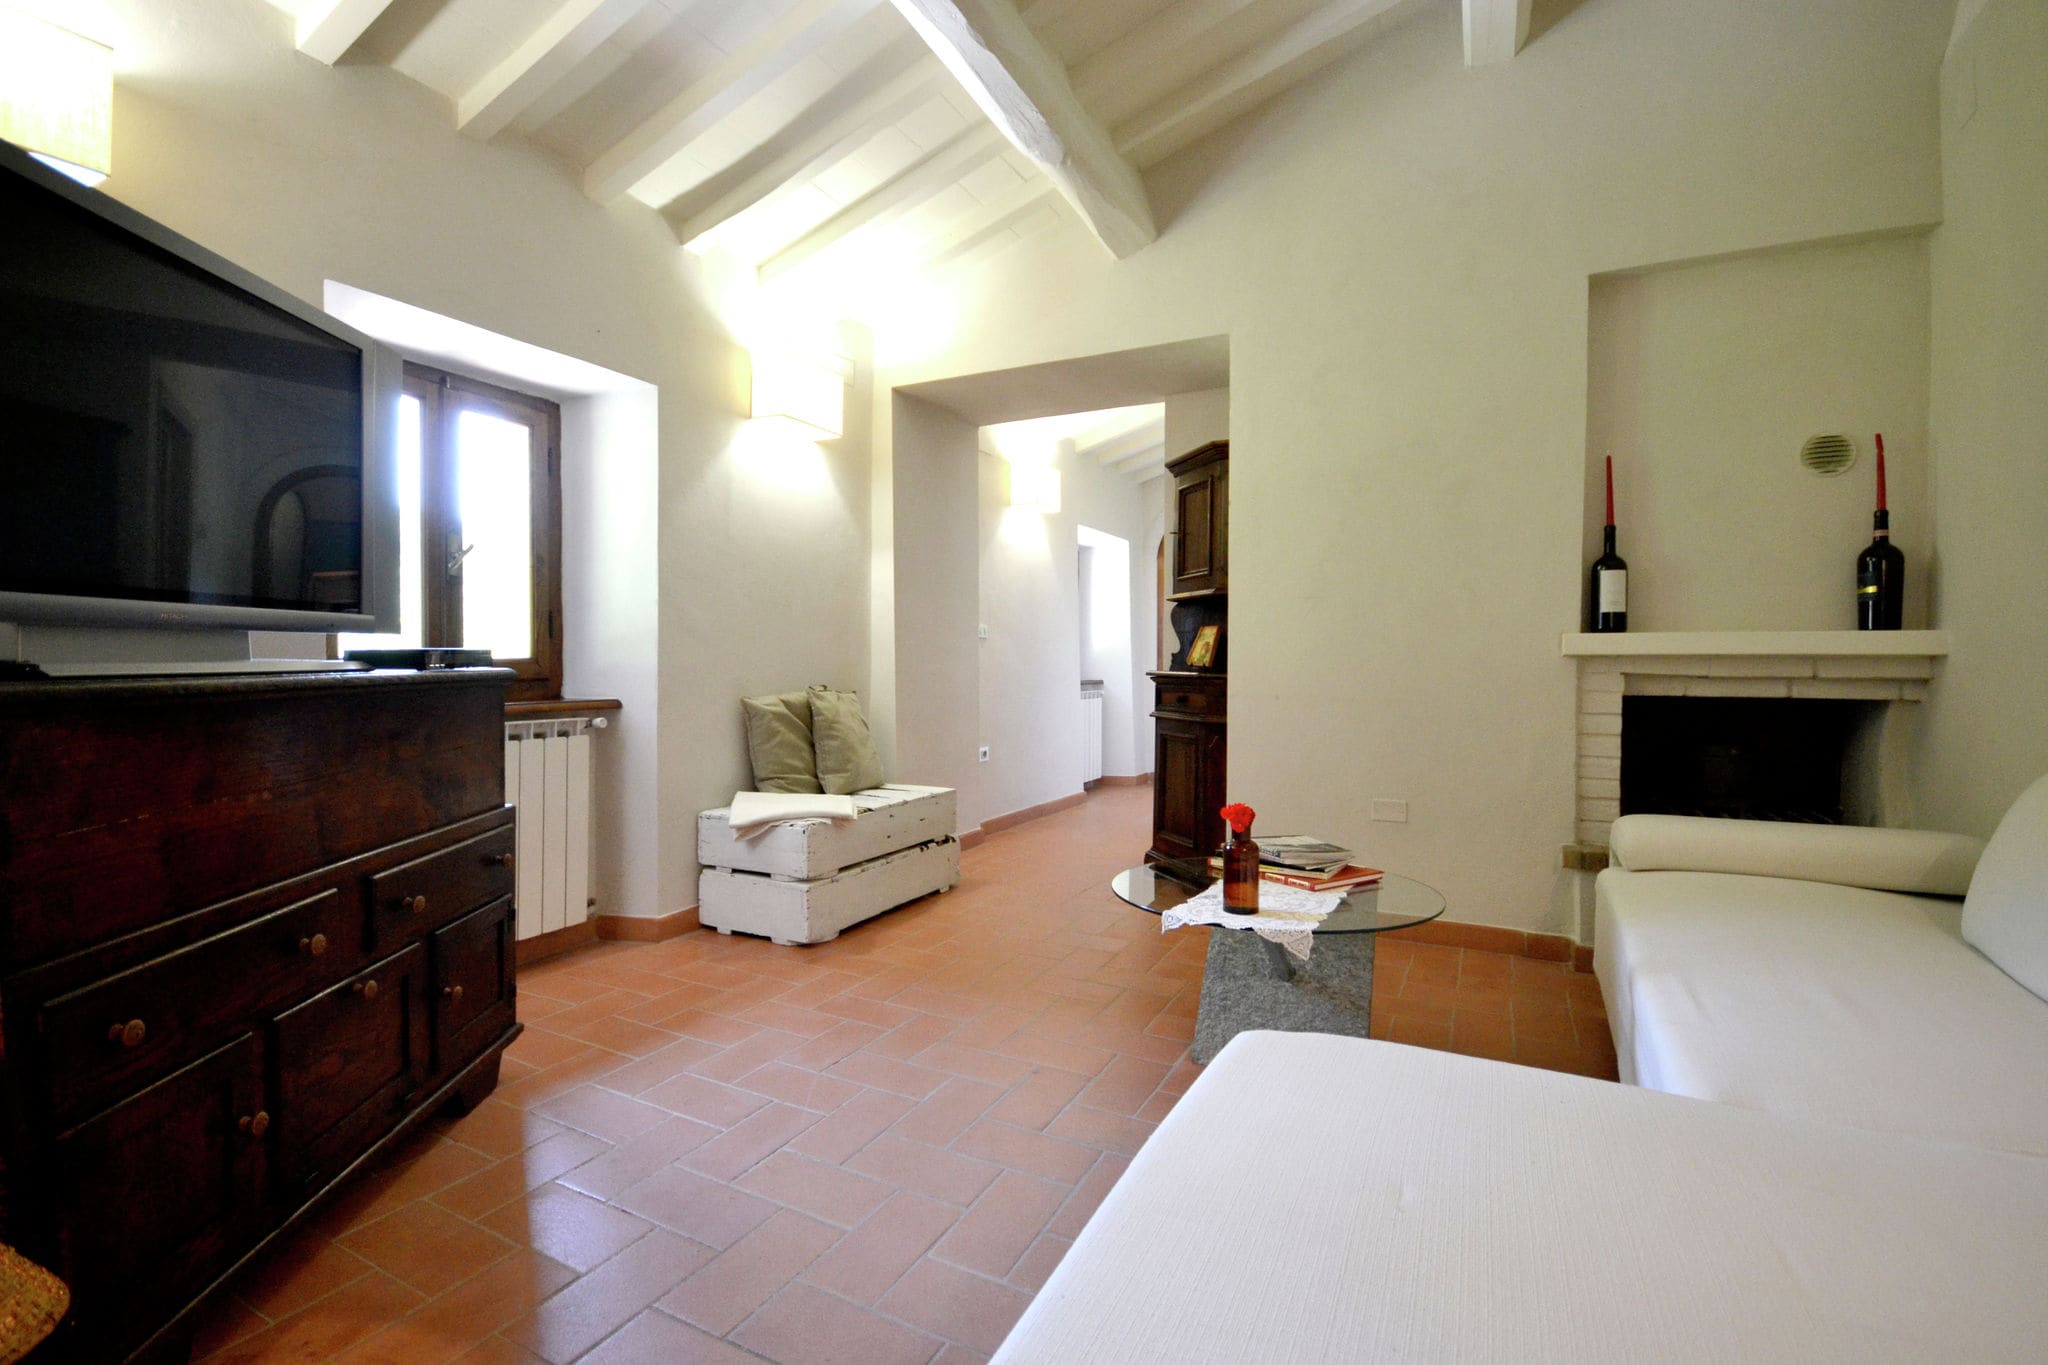 Nice villa with private pool, large garden, lots of privacy and close to Cortona